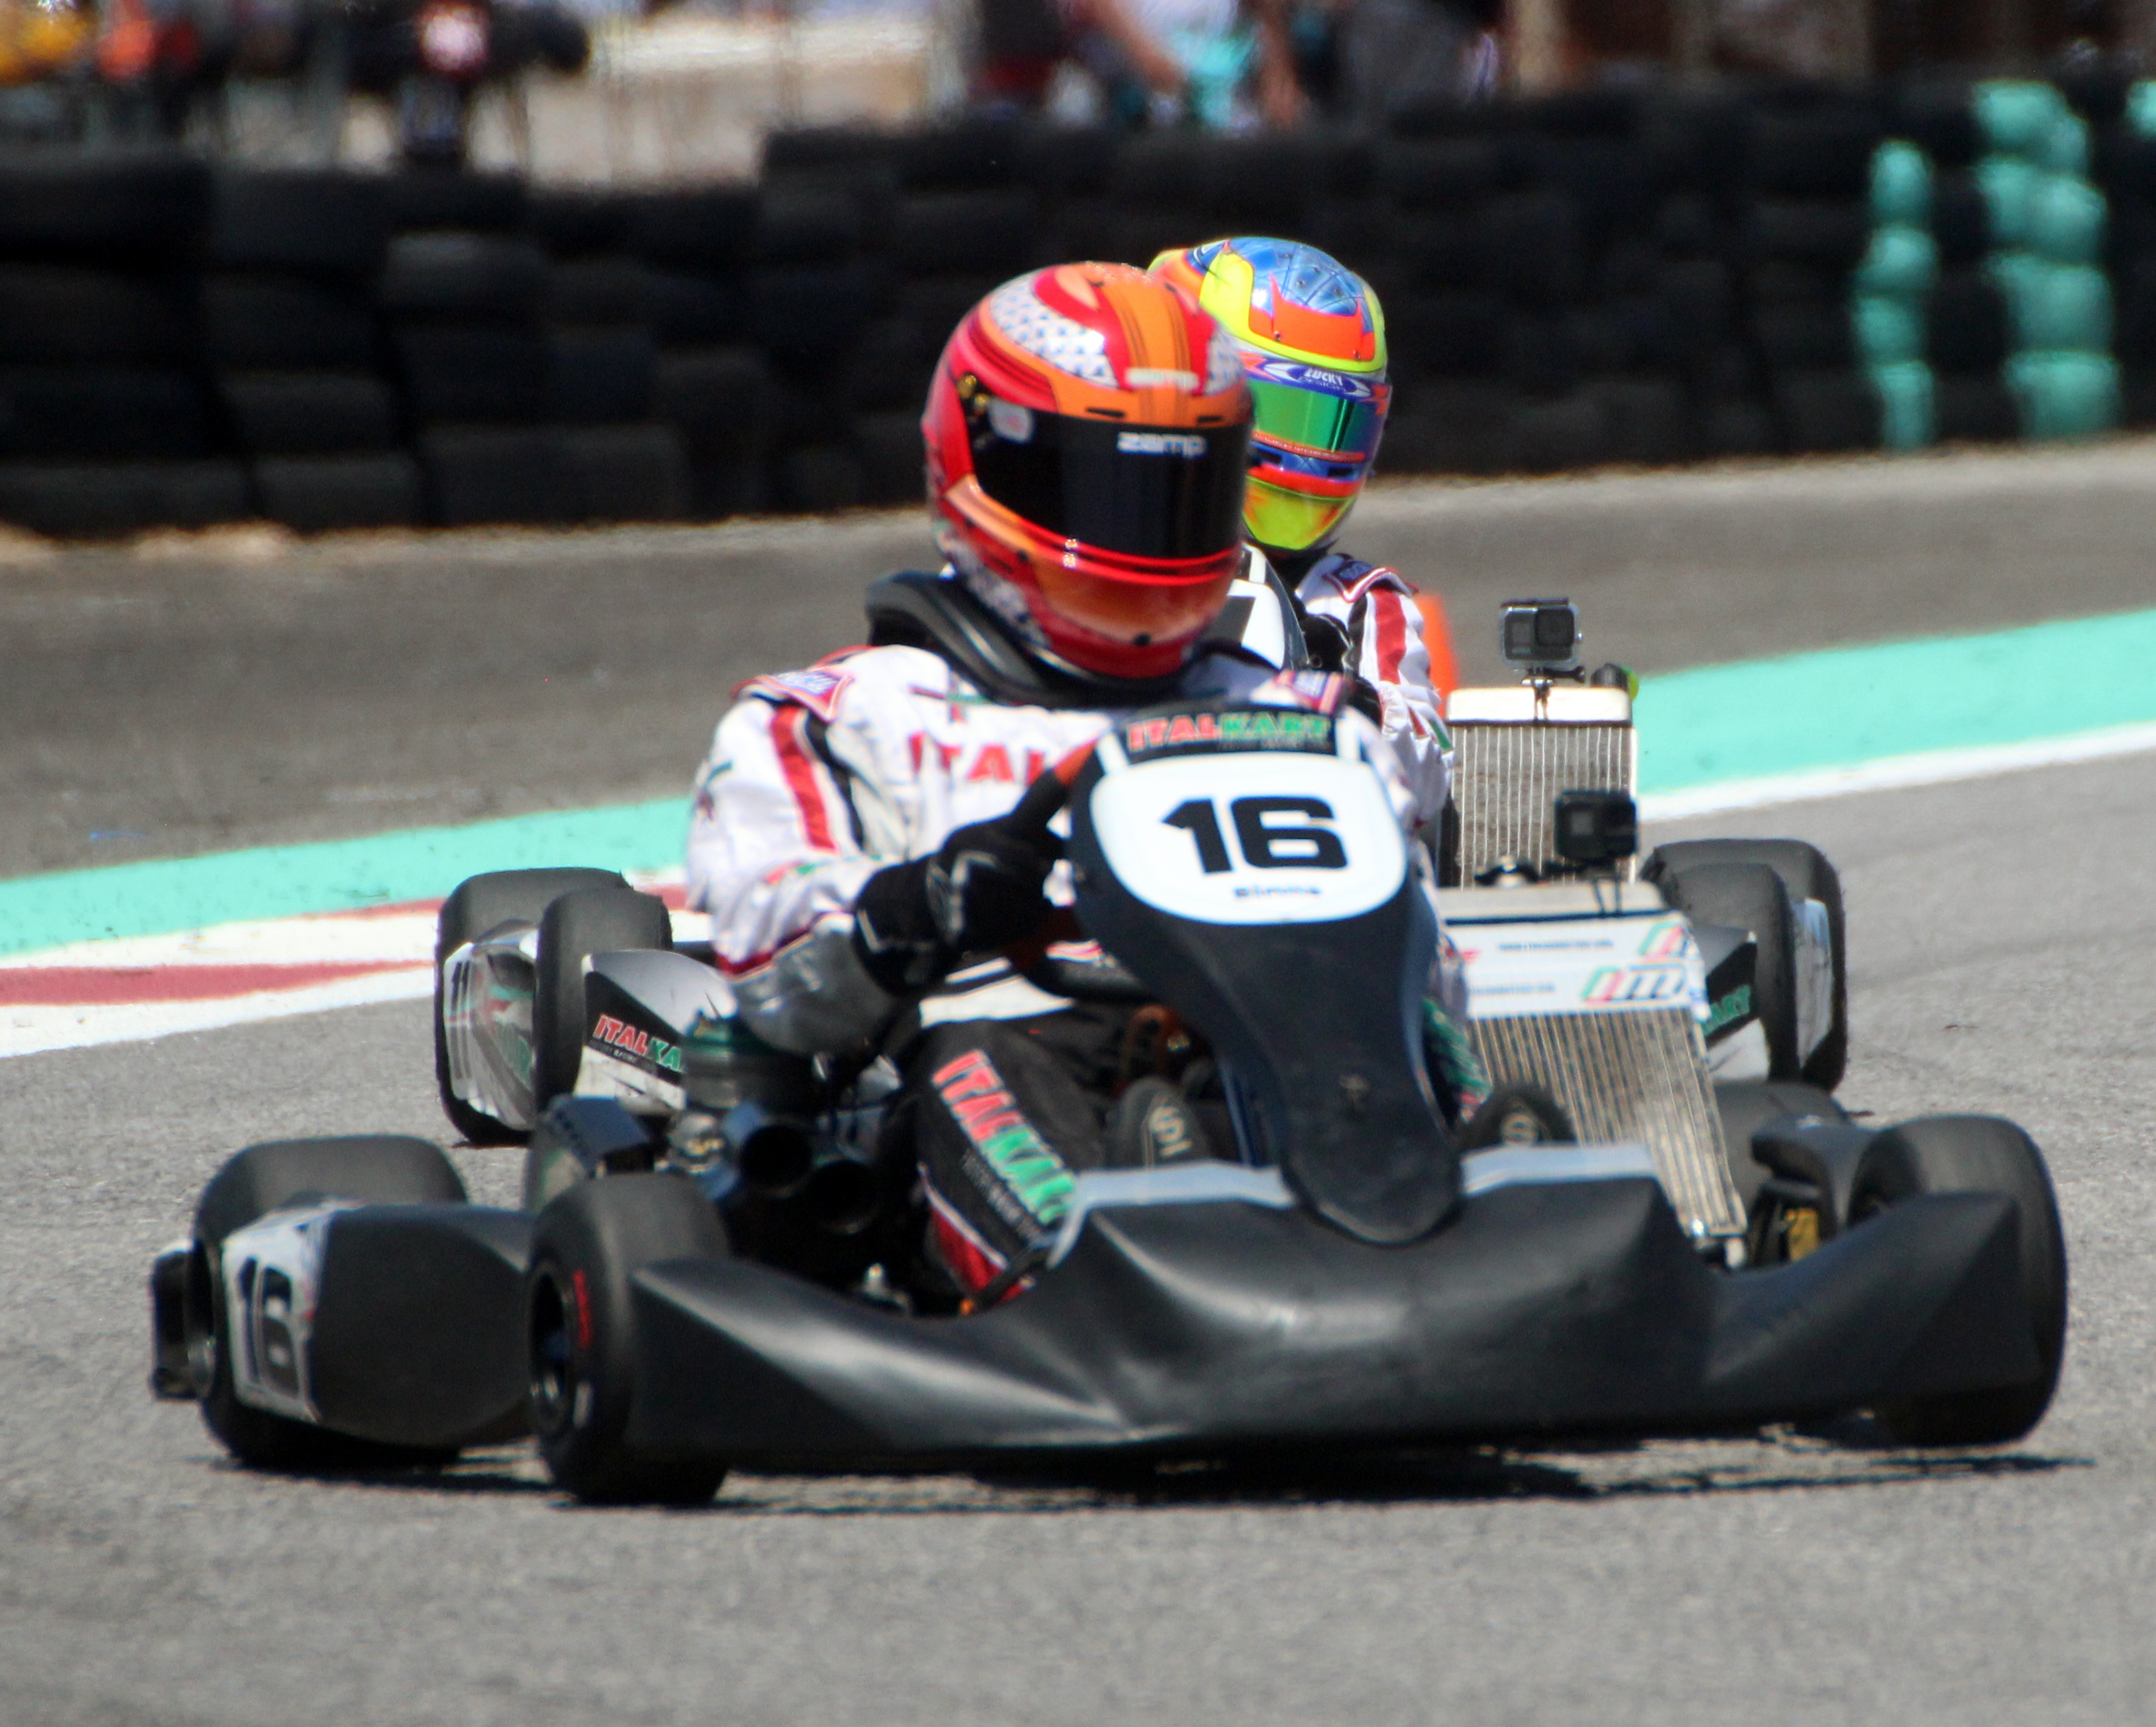 Karting Association's Final Championship Points Standings (Motor Sports)